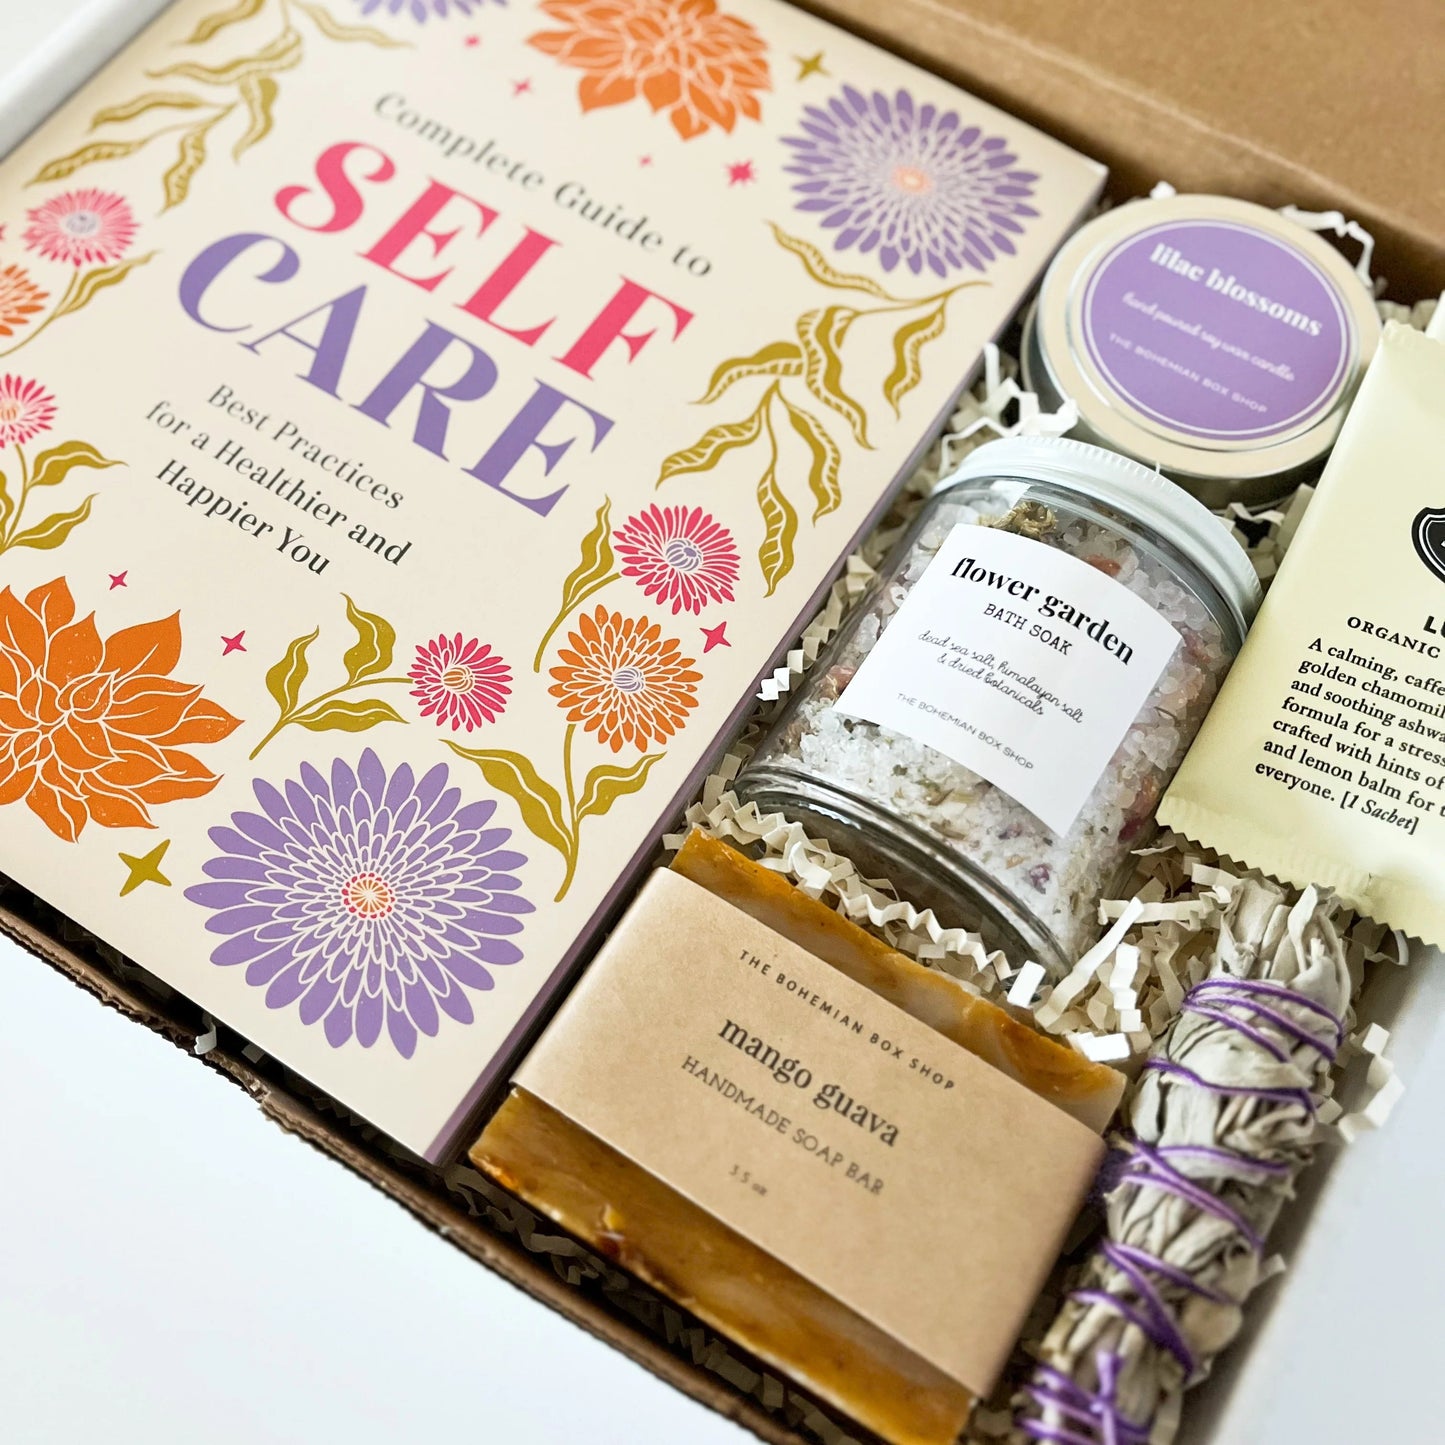 Self-care gift set for women. Includes a complete guy to self-care book, lilac soy candle, flower garden bath soak mango guava soap, tea packets, and mini sage bundle. 